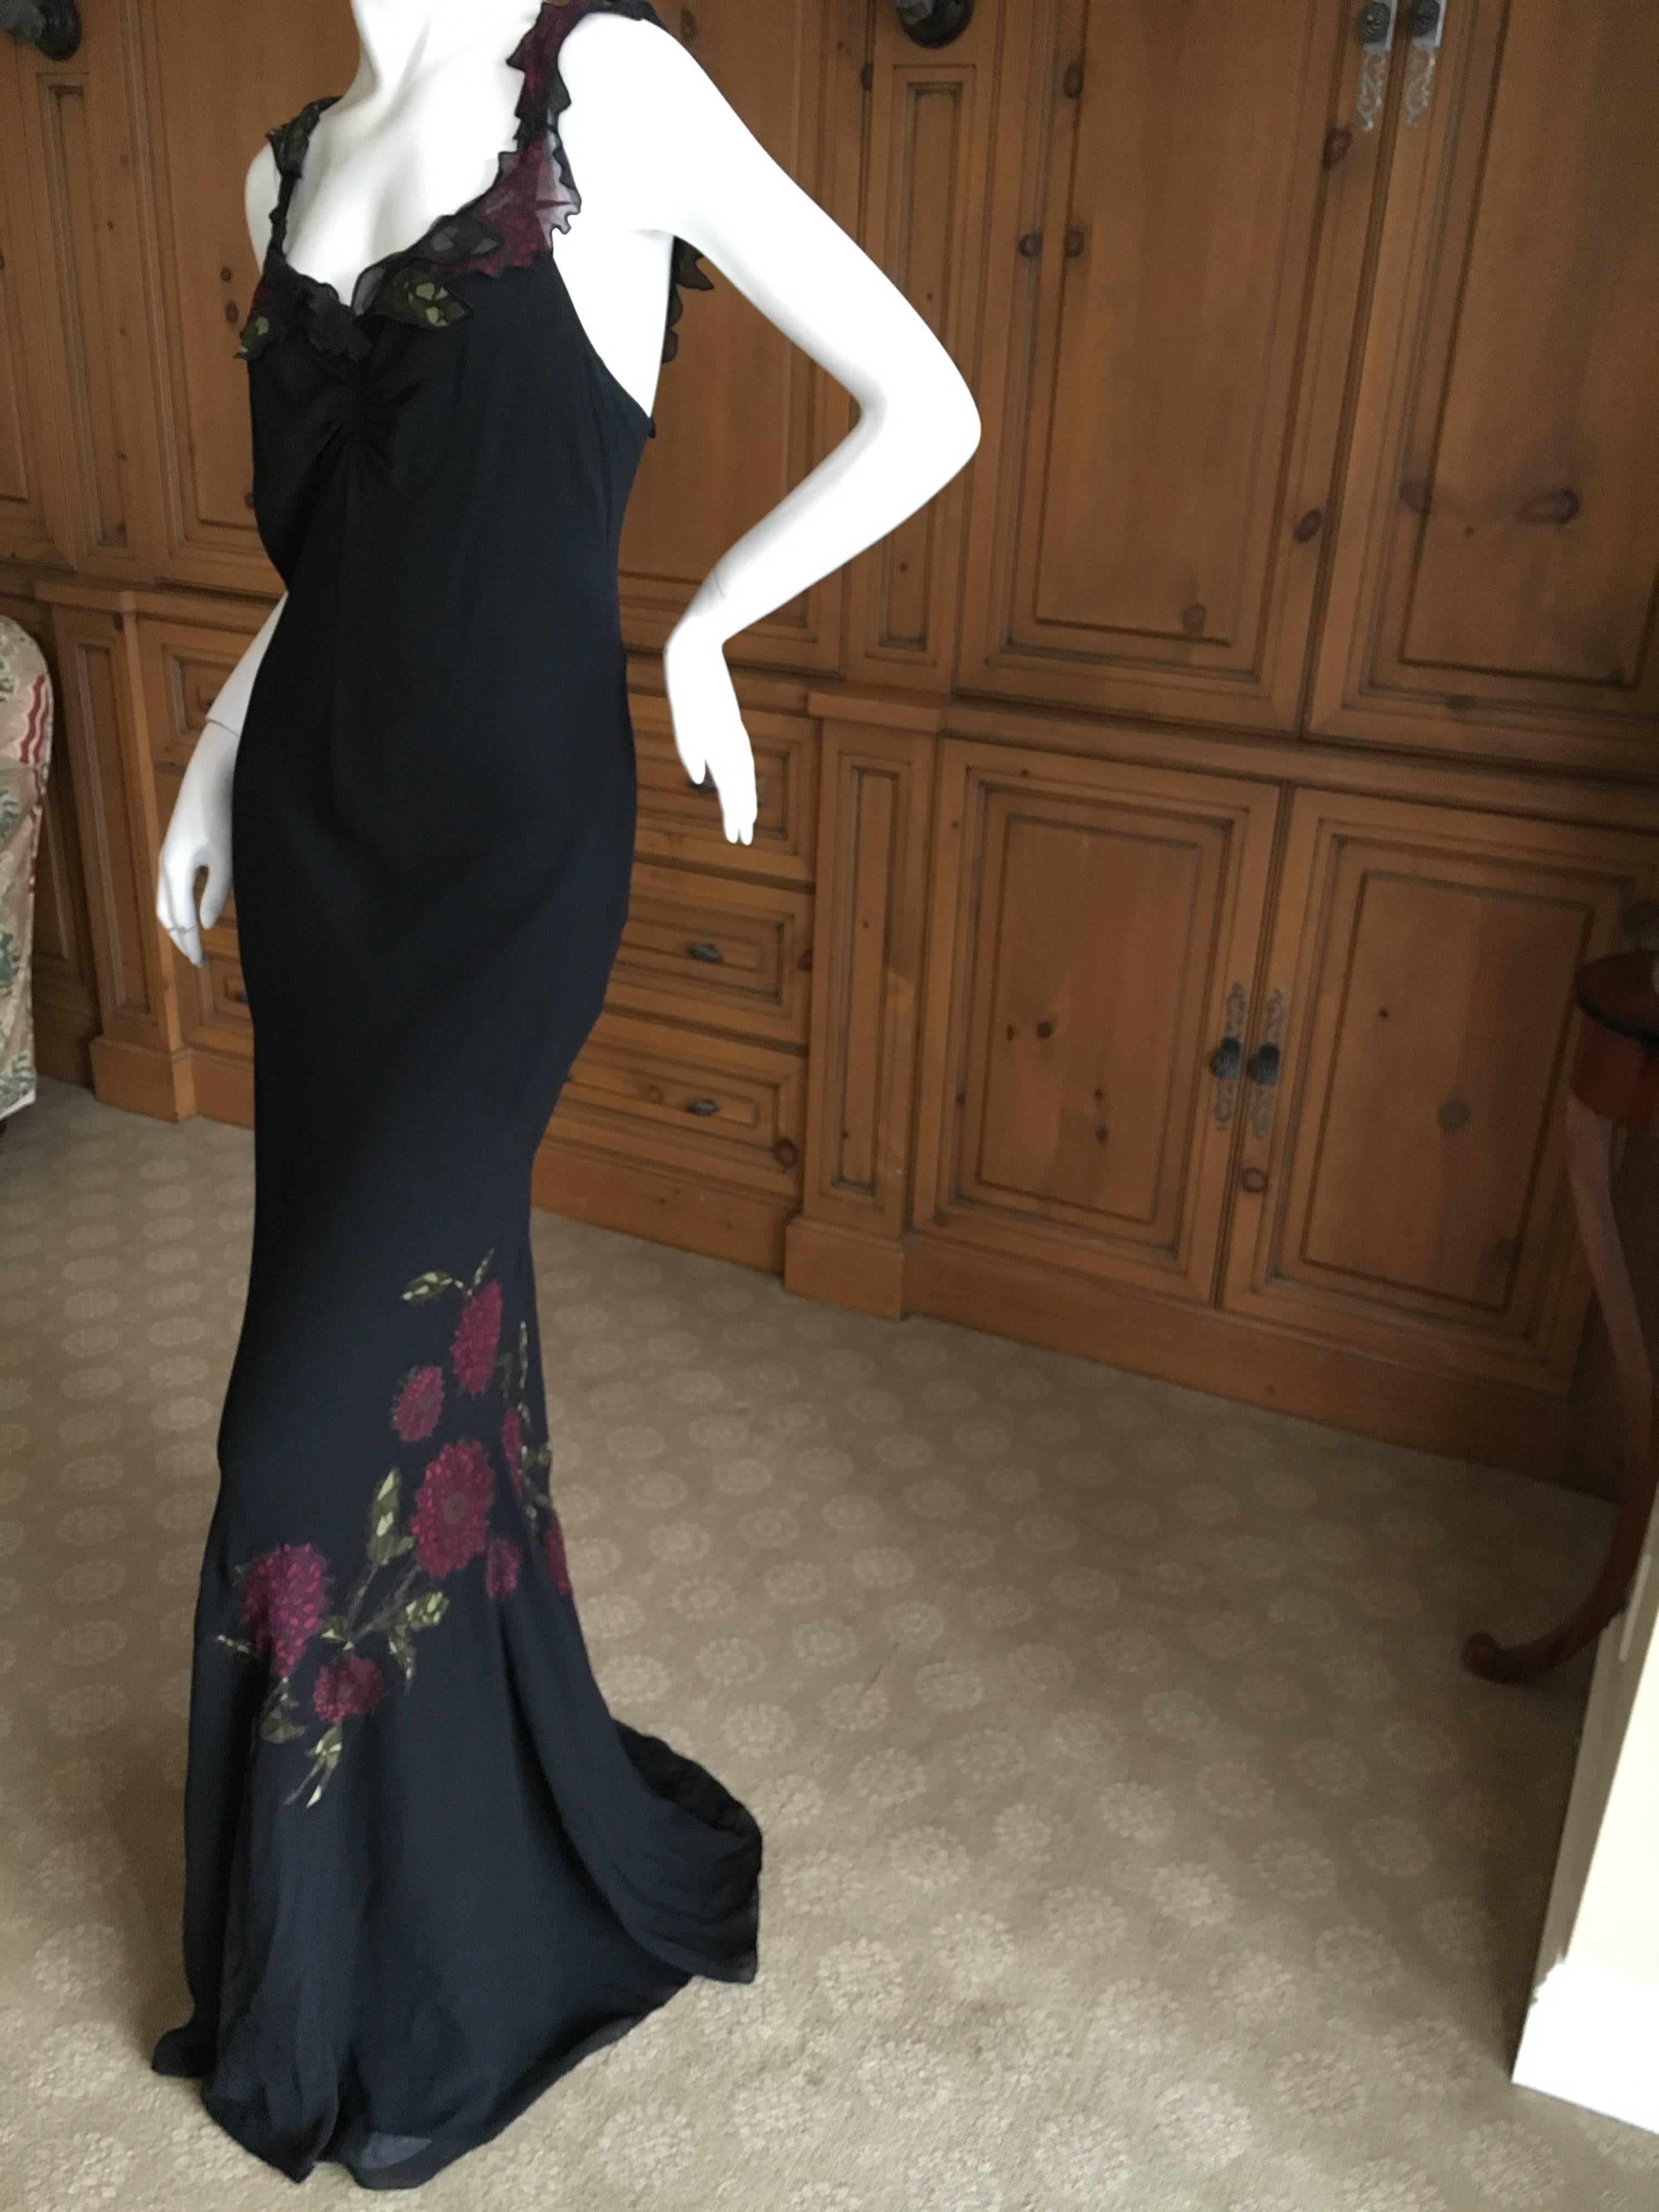 Beautiful bias cut black evening dress from John Galliano circa 1999.
There are sheer floral appliqués throughout with delicate floral treatment on the neckline and straps. 
So much prettier in person , it is difficult to photograph .
Size 42
Bust